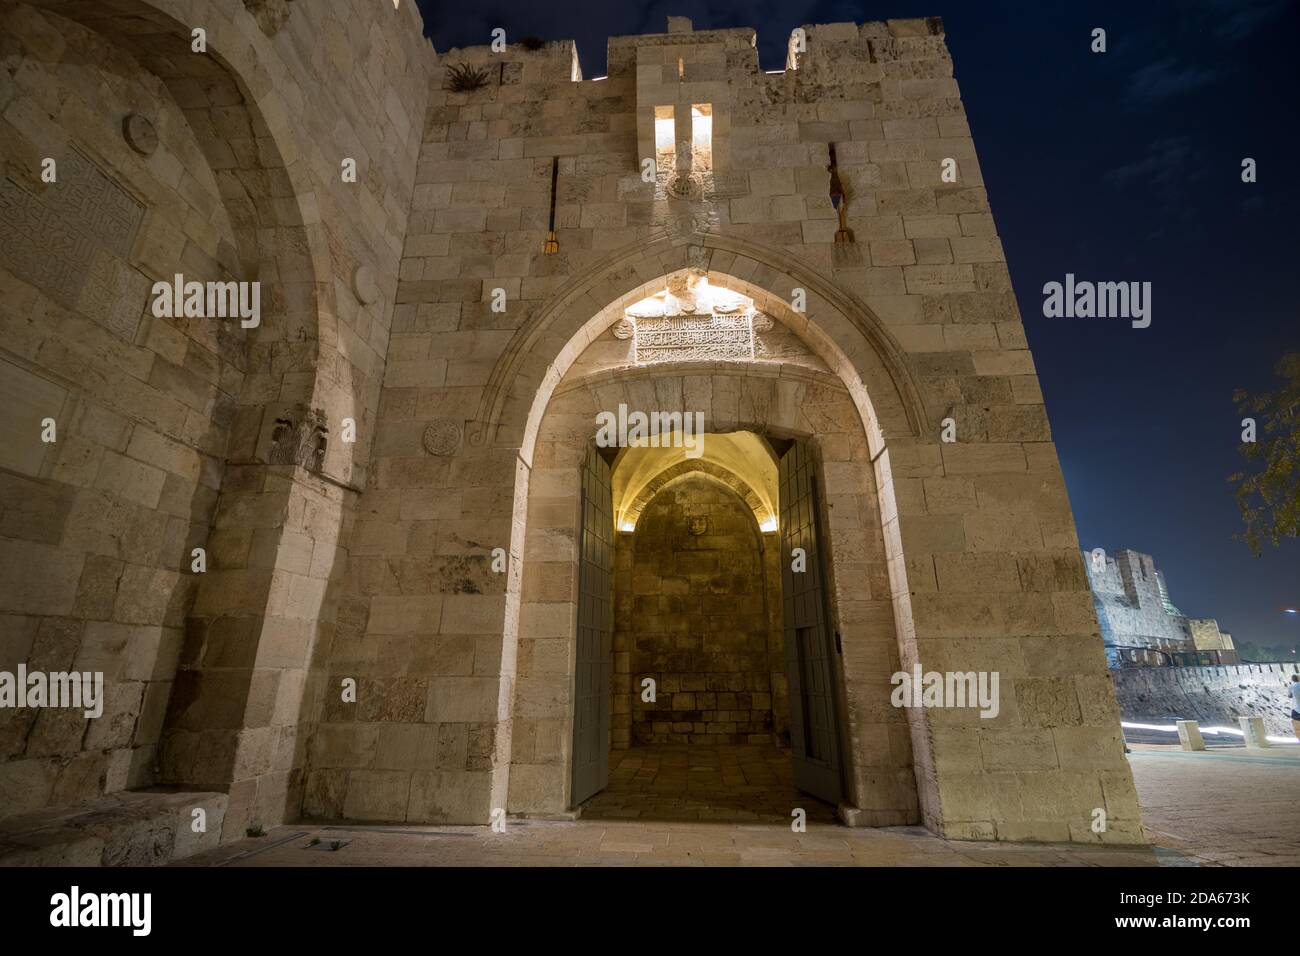 jerusalem-israel. 28-10-2020. Jaffa Gate in the walls of the Old City of Jerusalem at night, view from the outside. Stock Photo